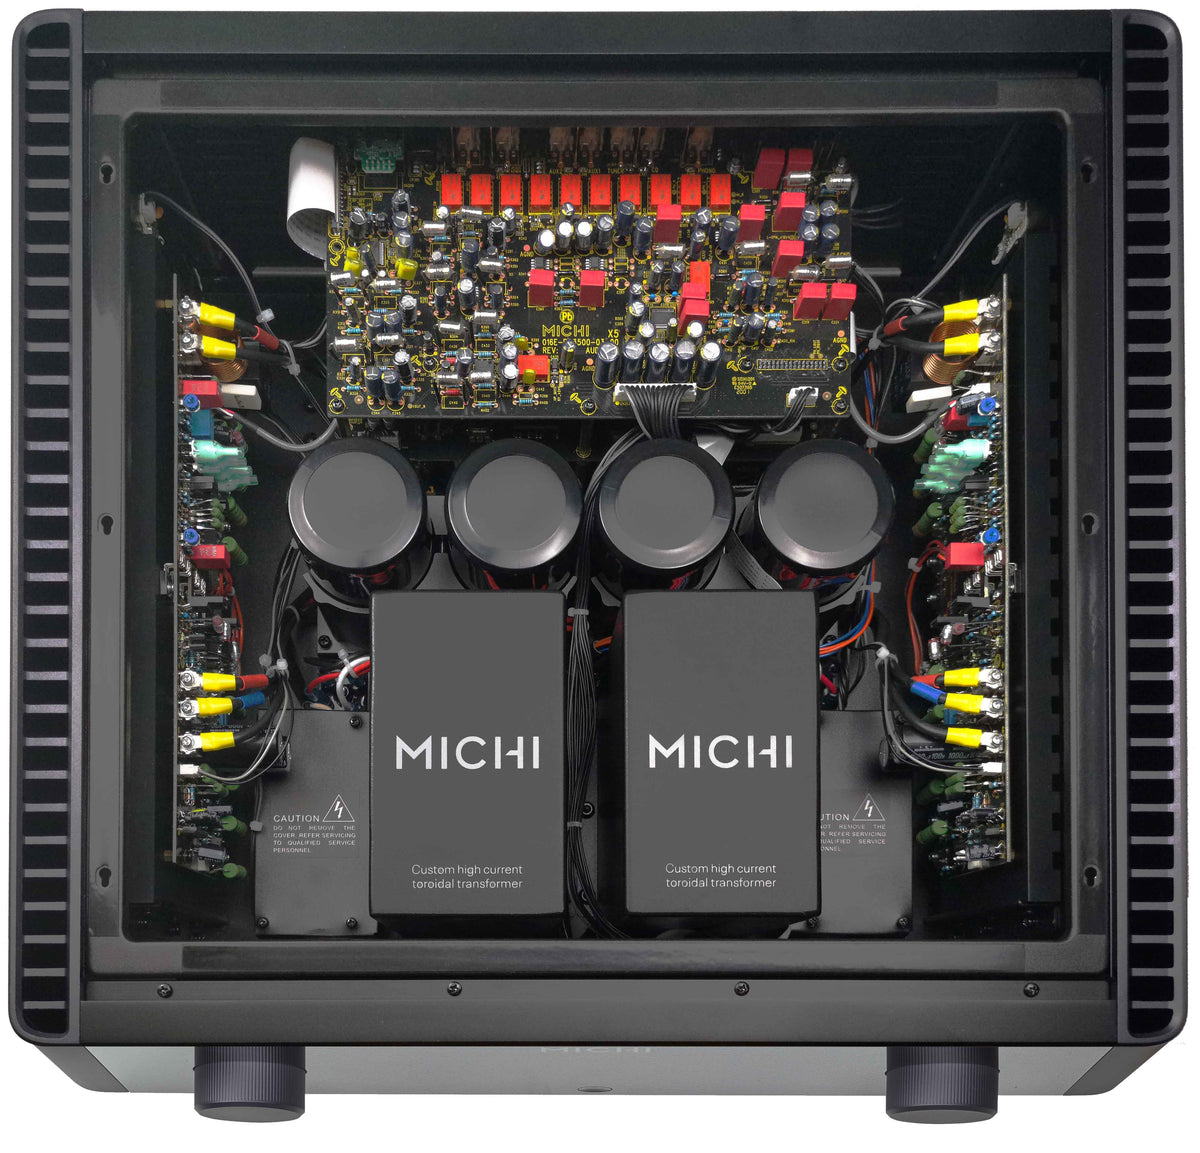 Rotel - Michi X5 Integrated Amplifier